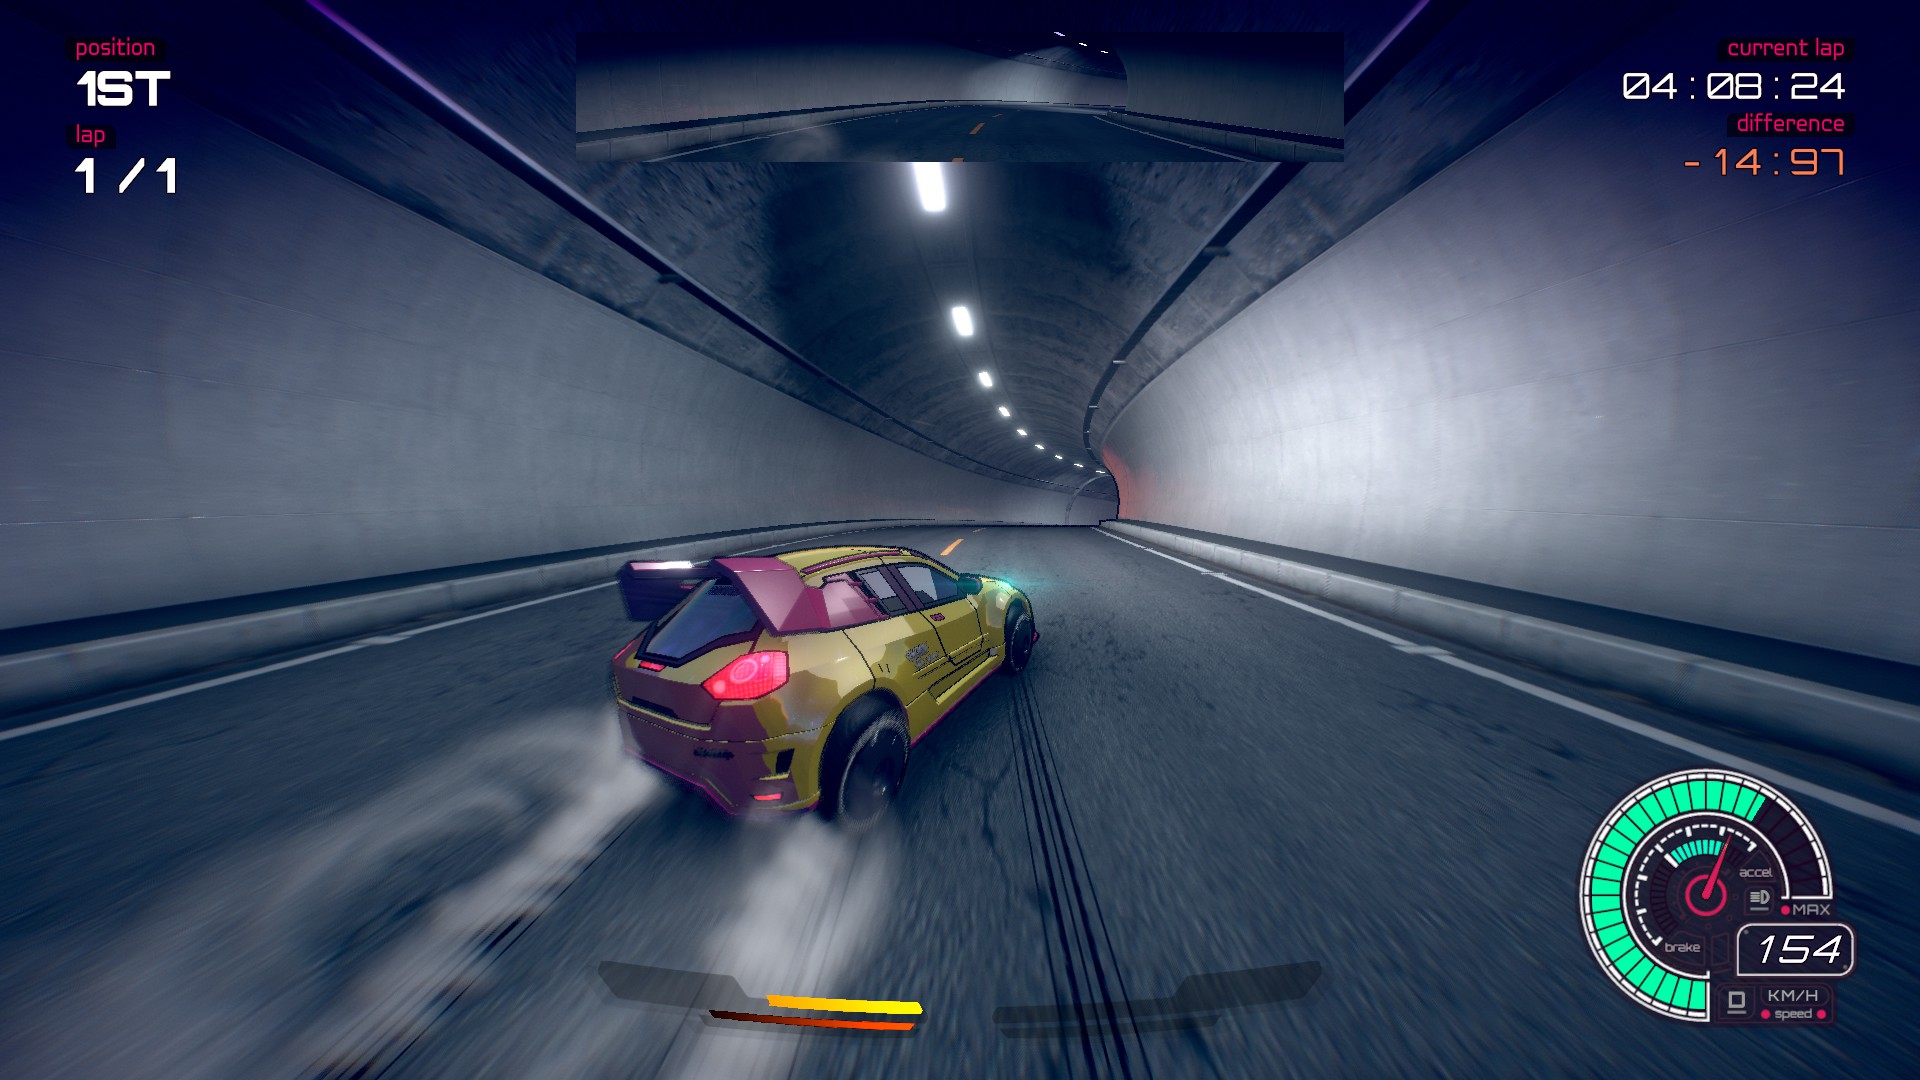 Brake to Drift is in the game as a option for the player's drift